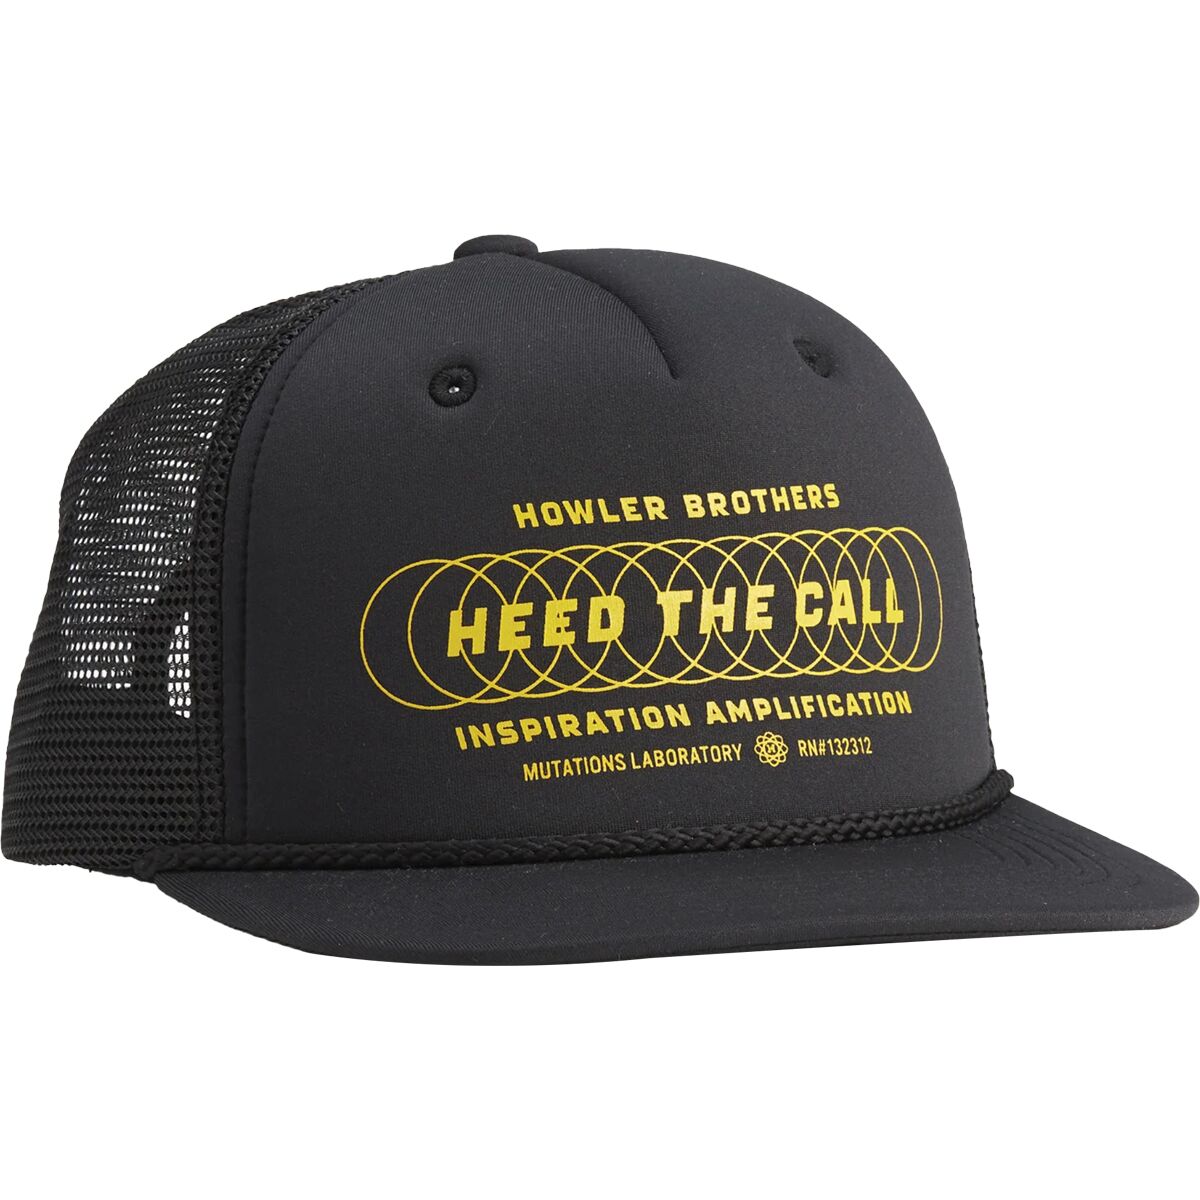 Howler Brothers Inspiration Amplification Structured Snapback Hat